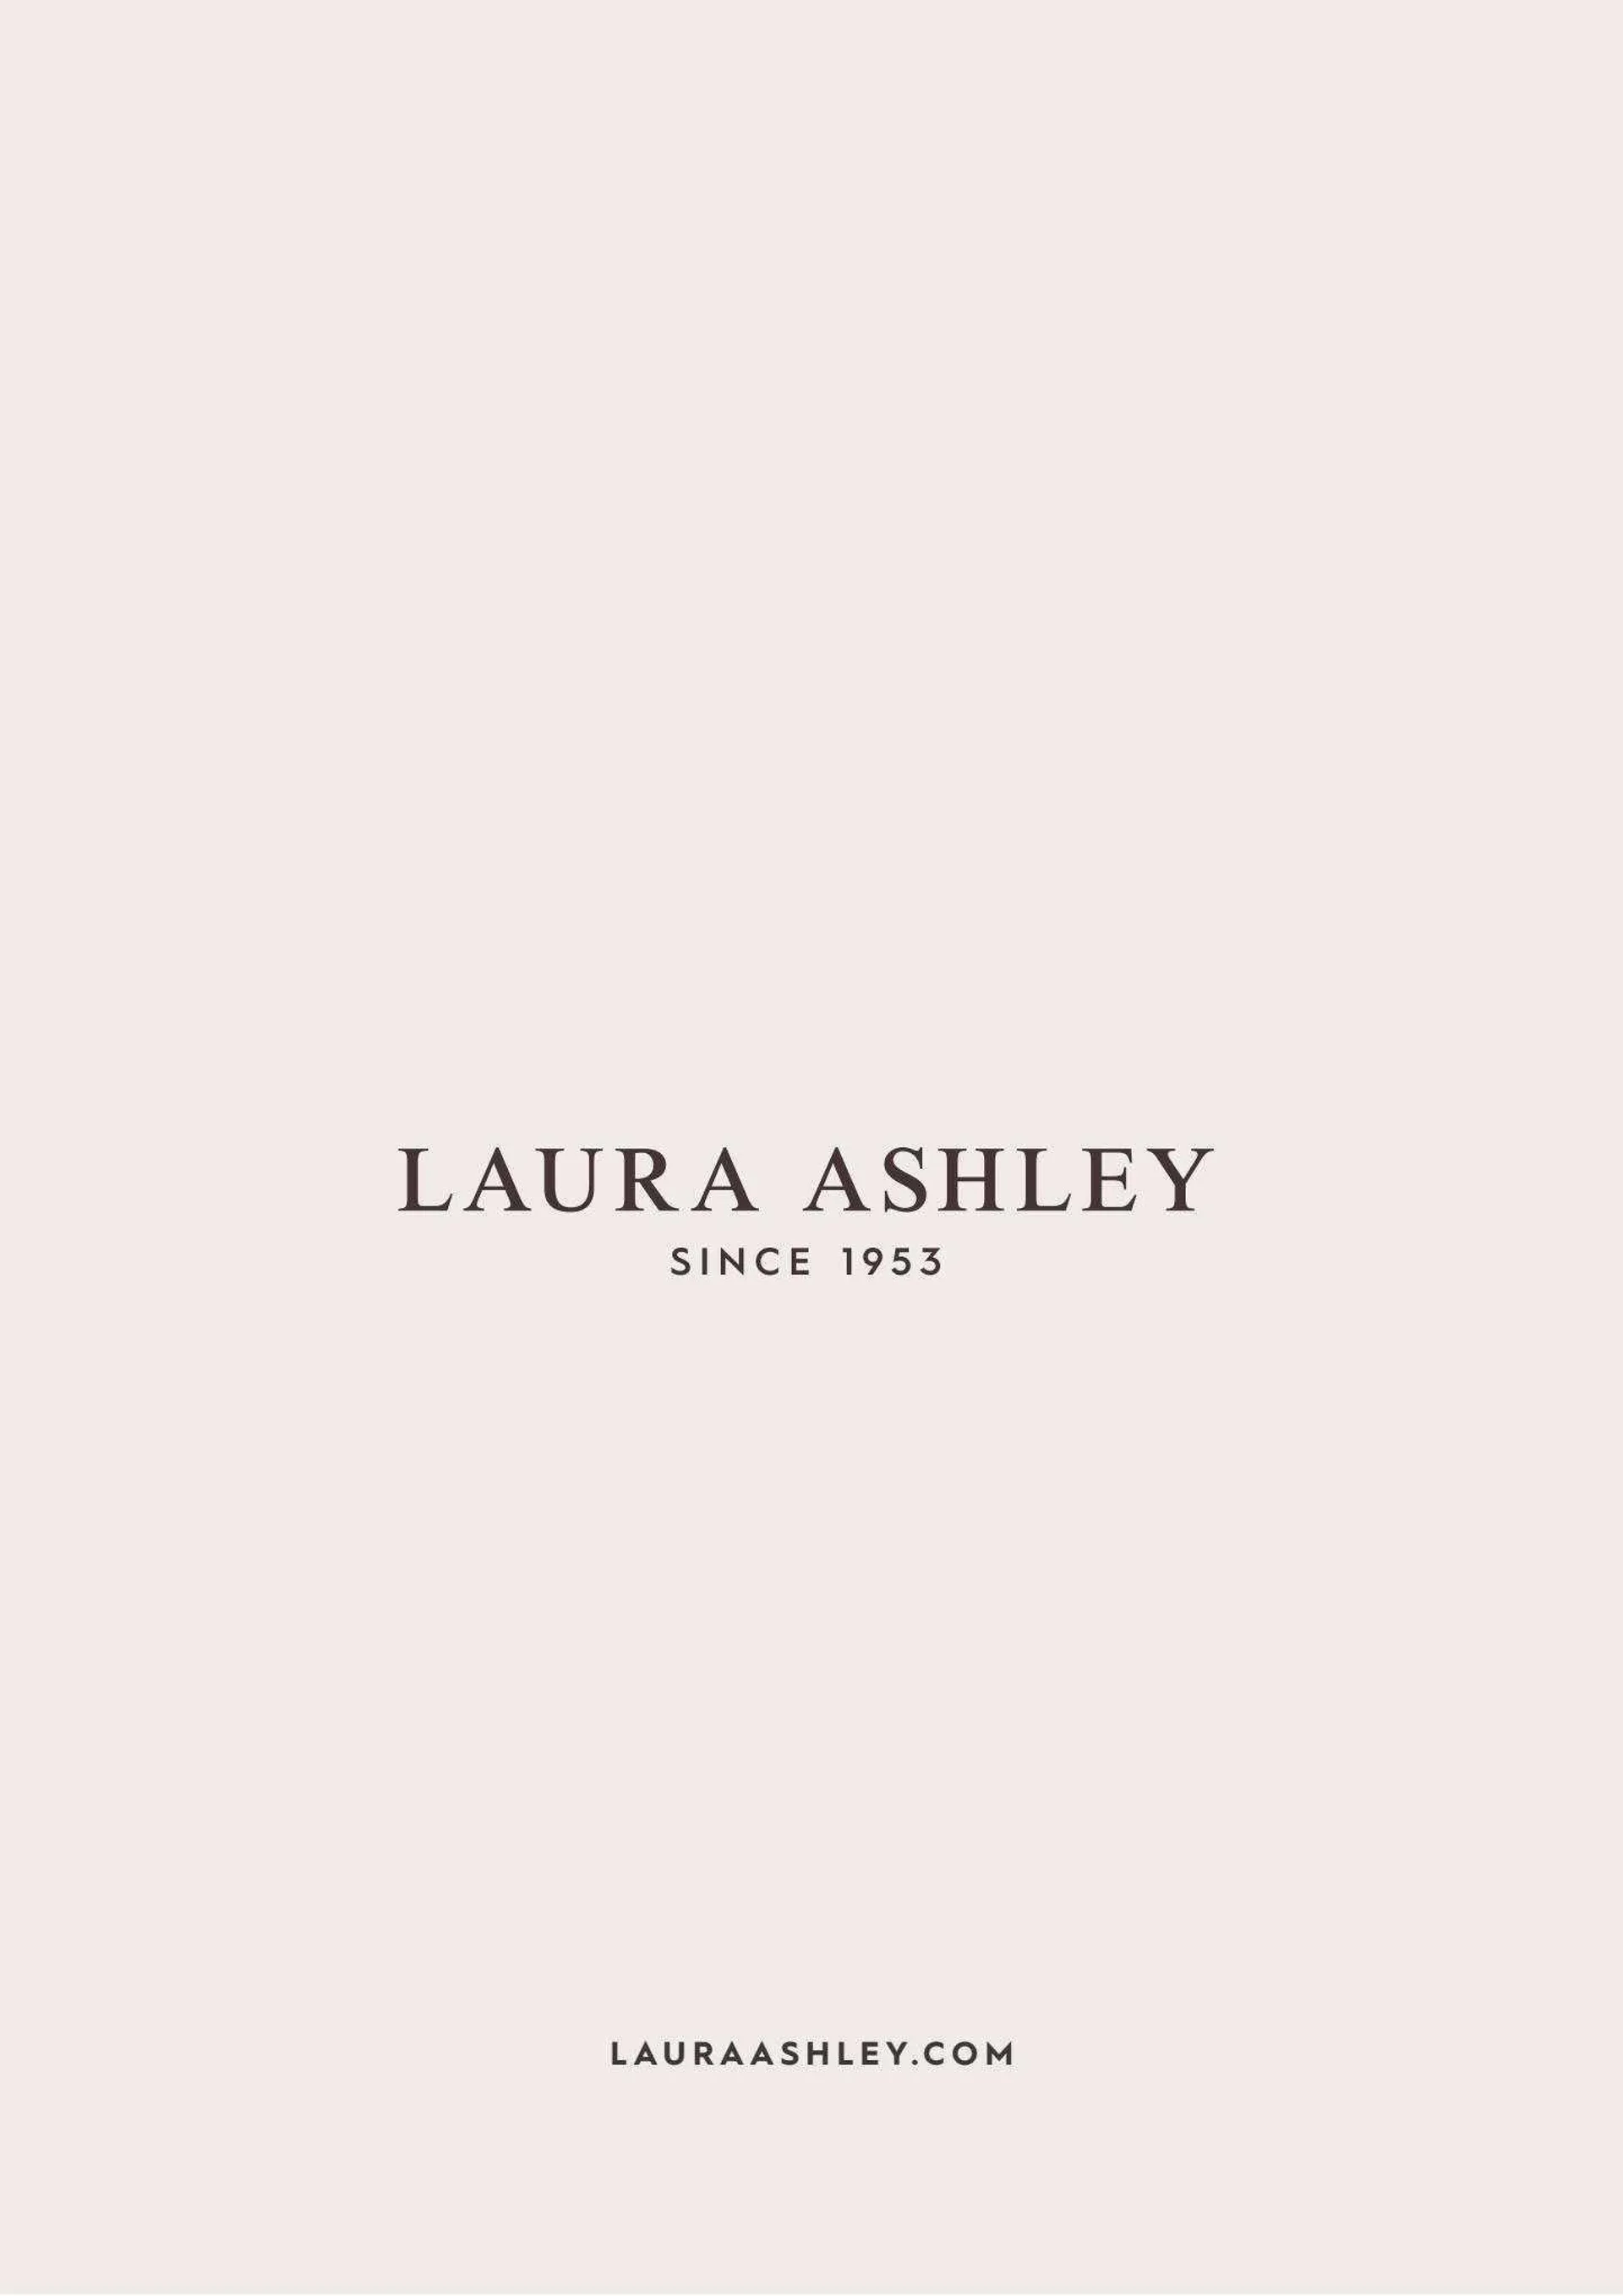 Laura Ashley Weekly Offers - 34